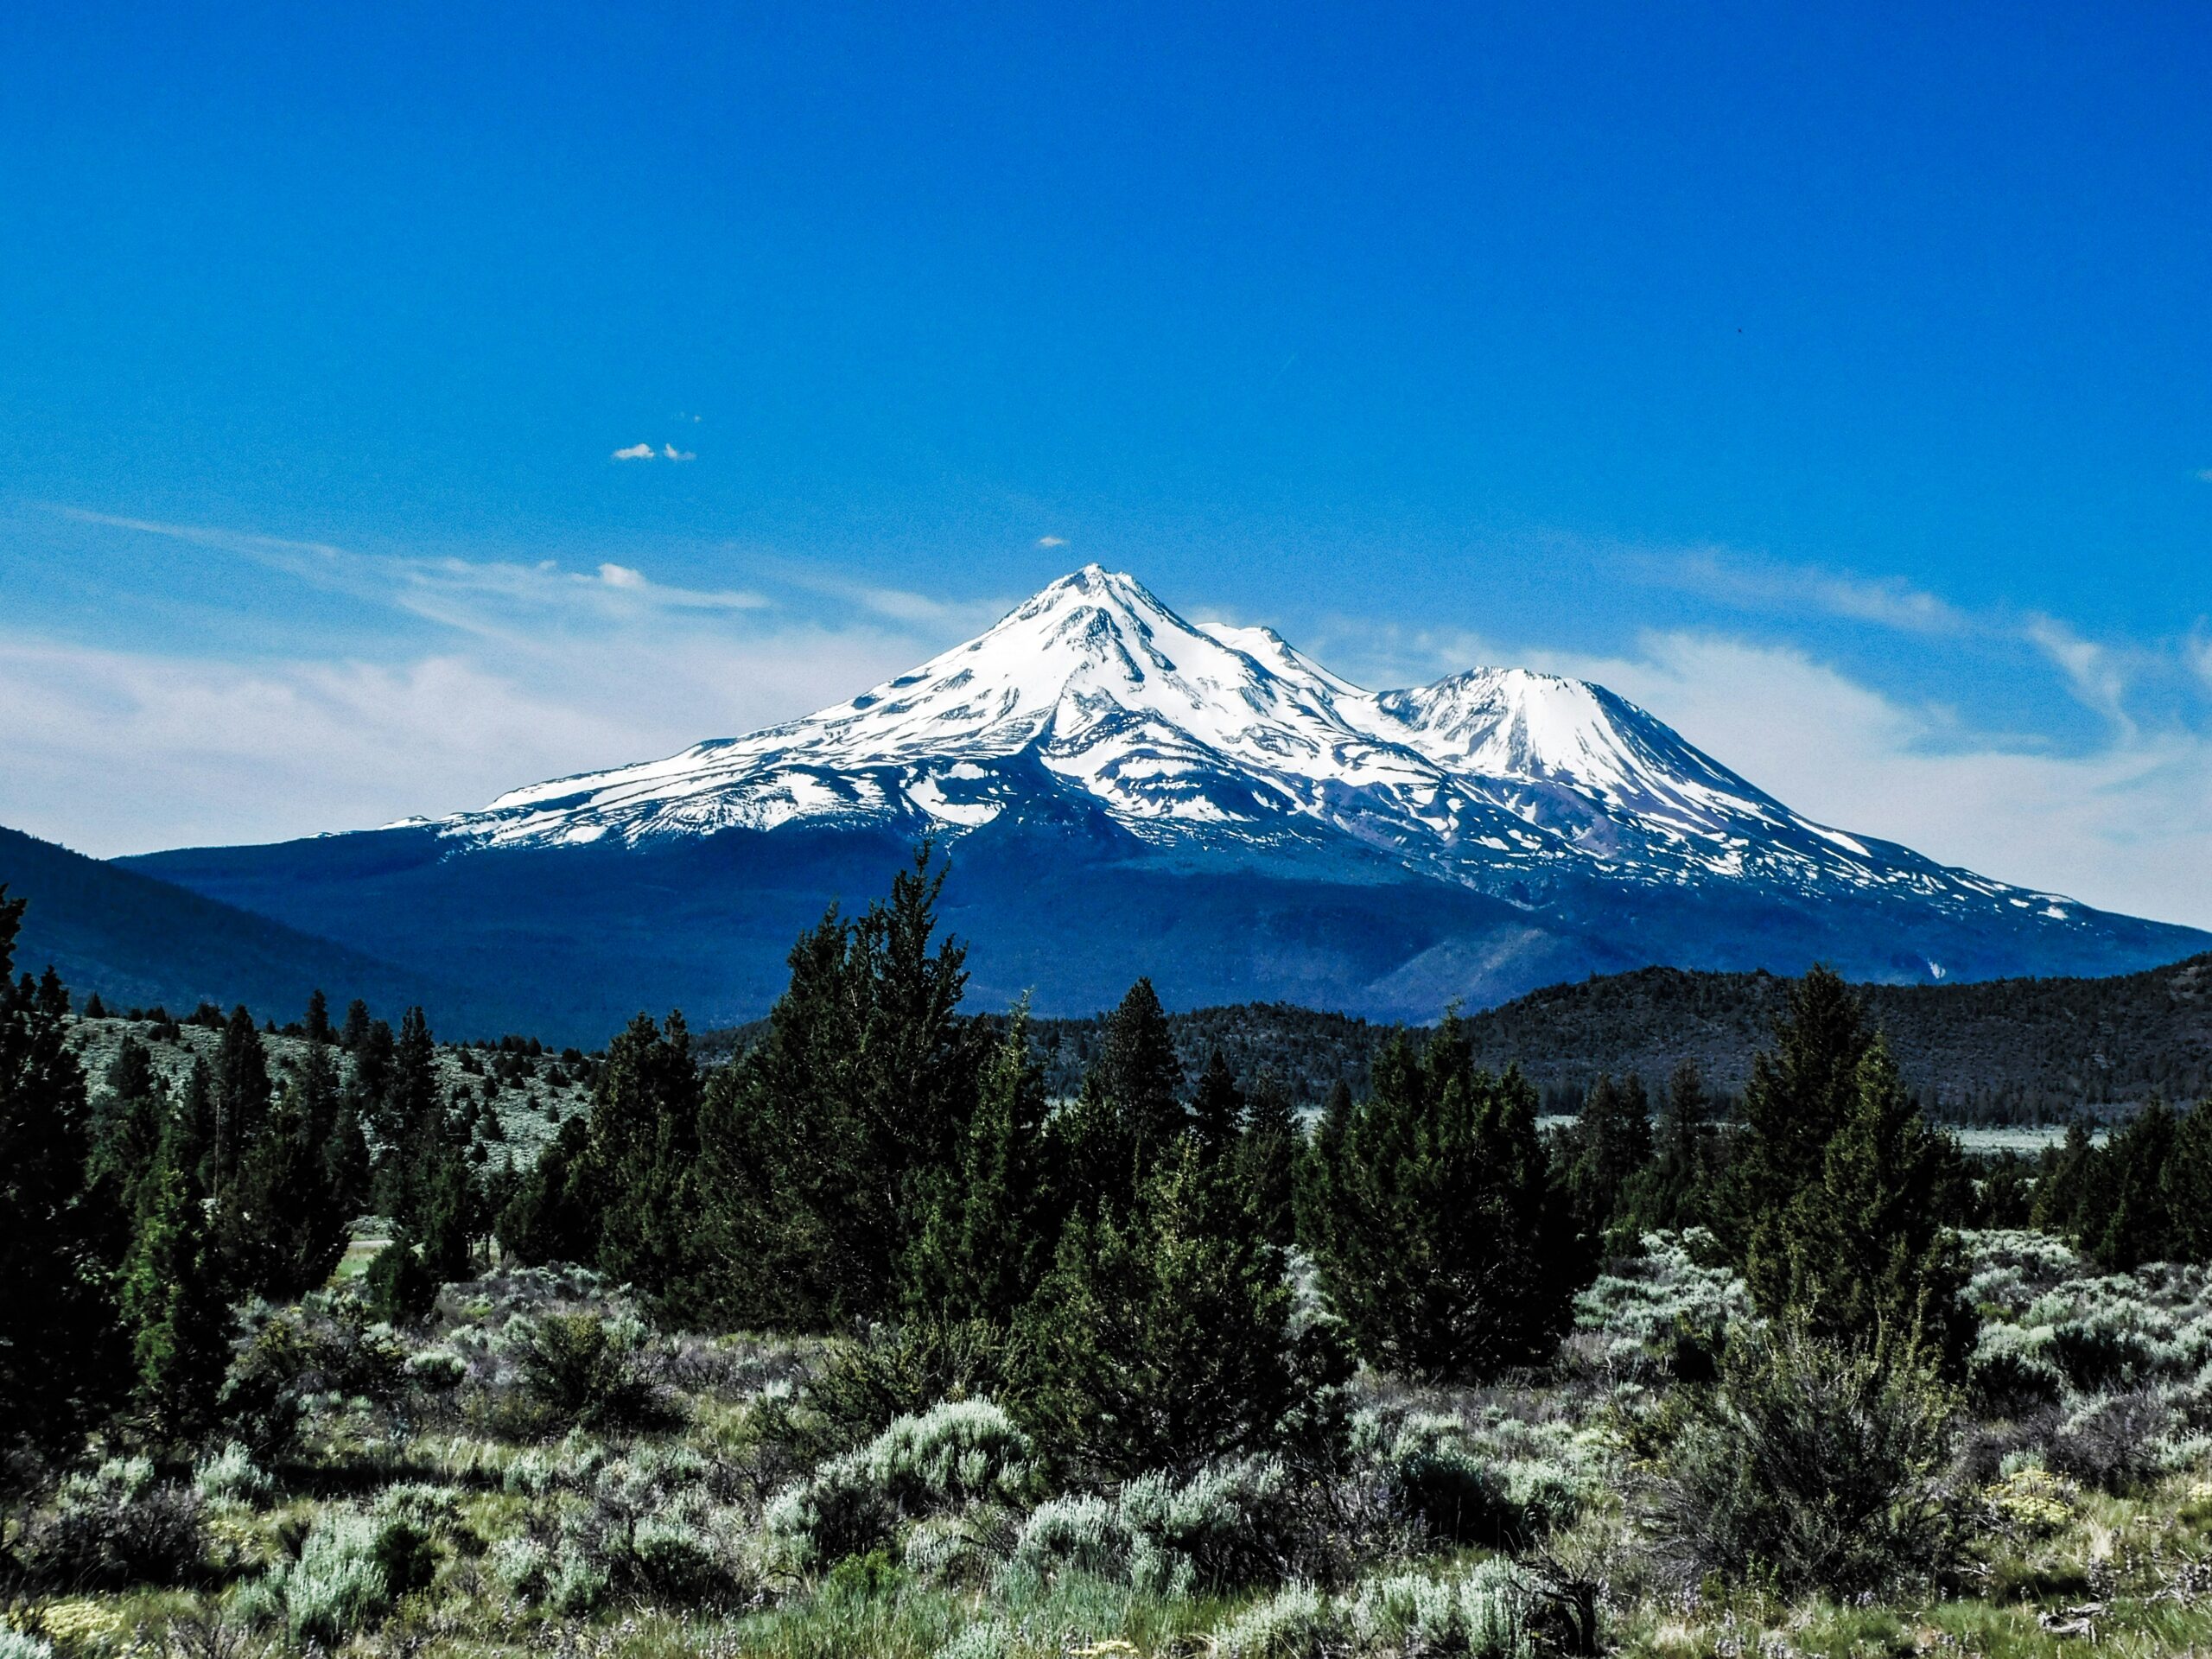 What Are The Closest Towns To Mount Shasta For Hiking?